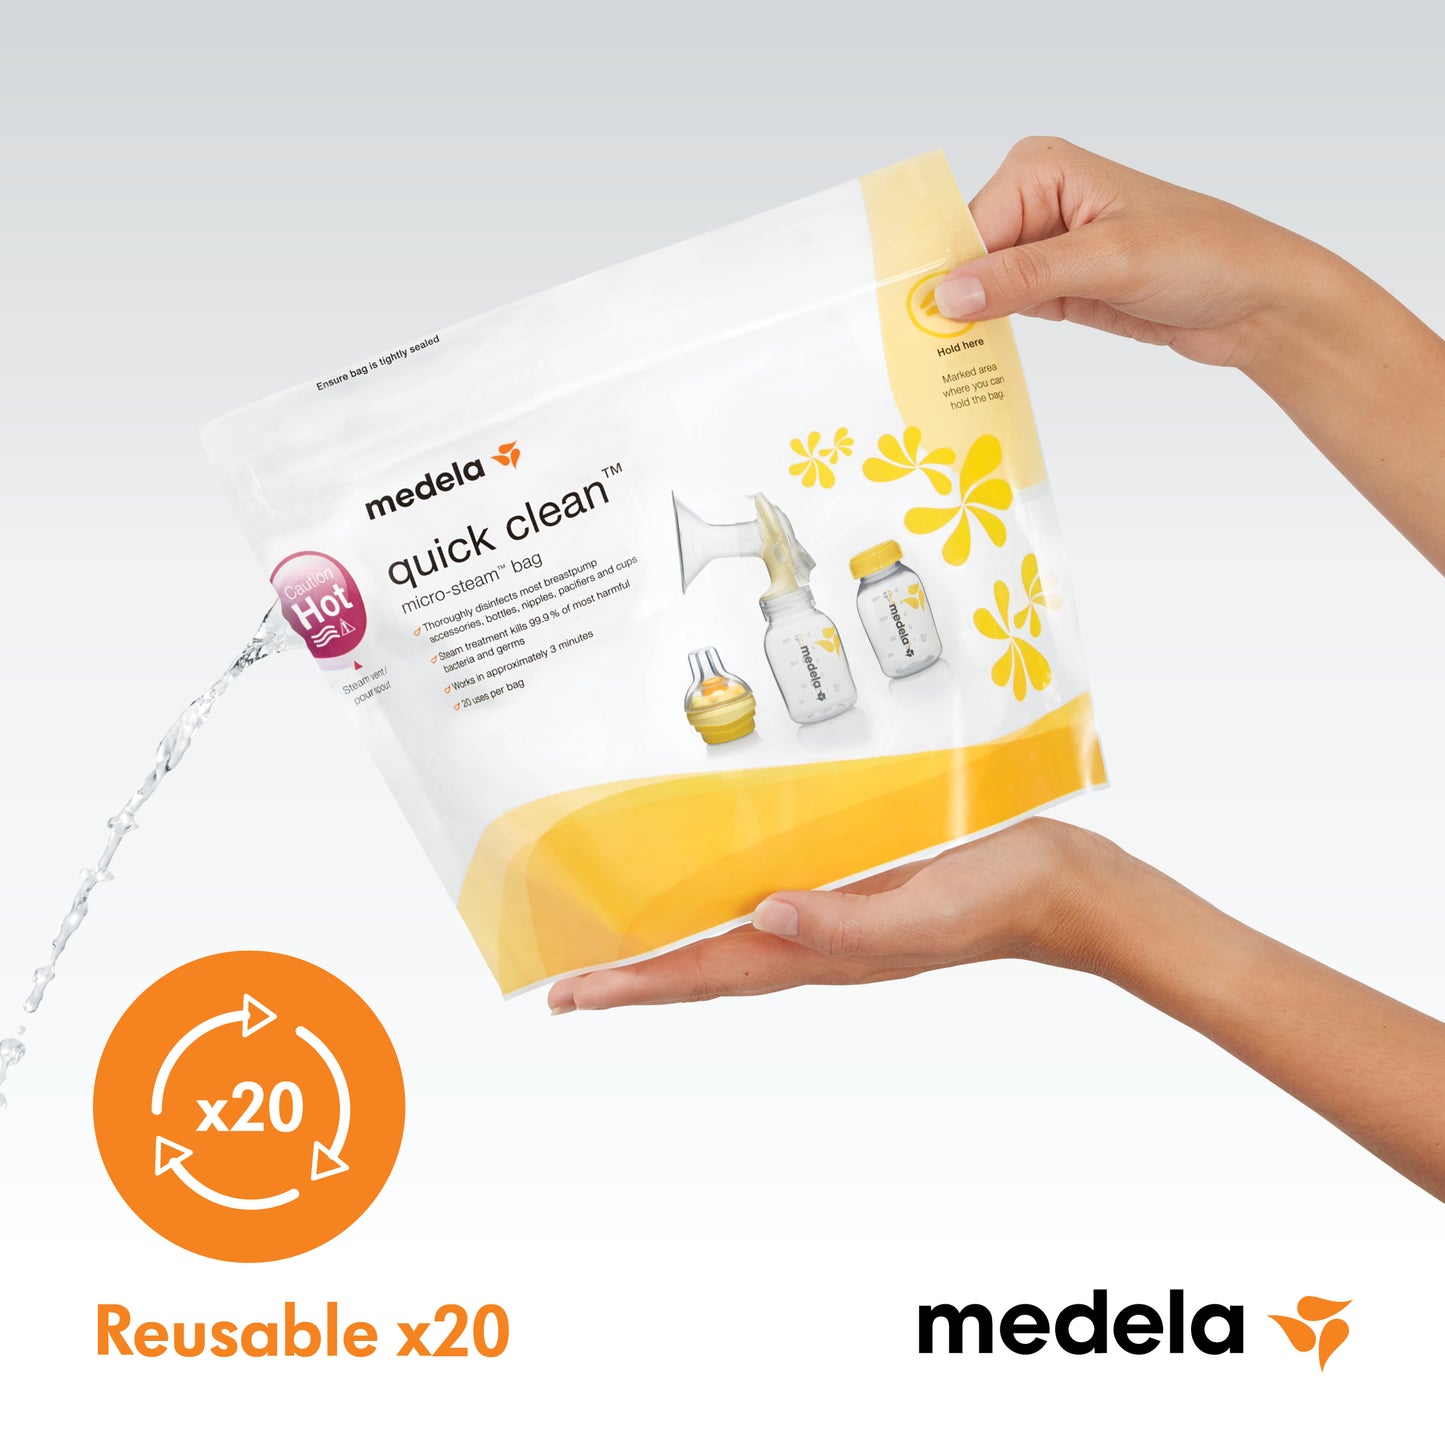 Medela Quick Clean Microwave Bags (box of 5's)